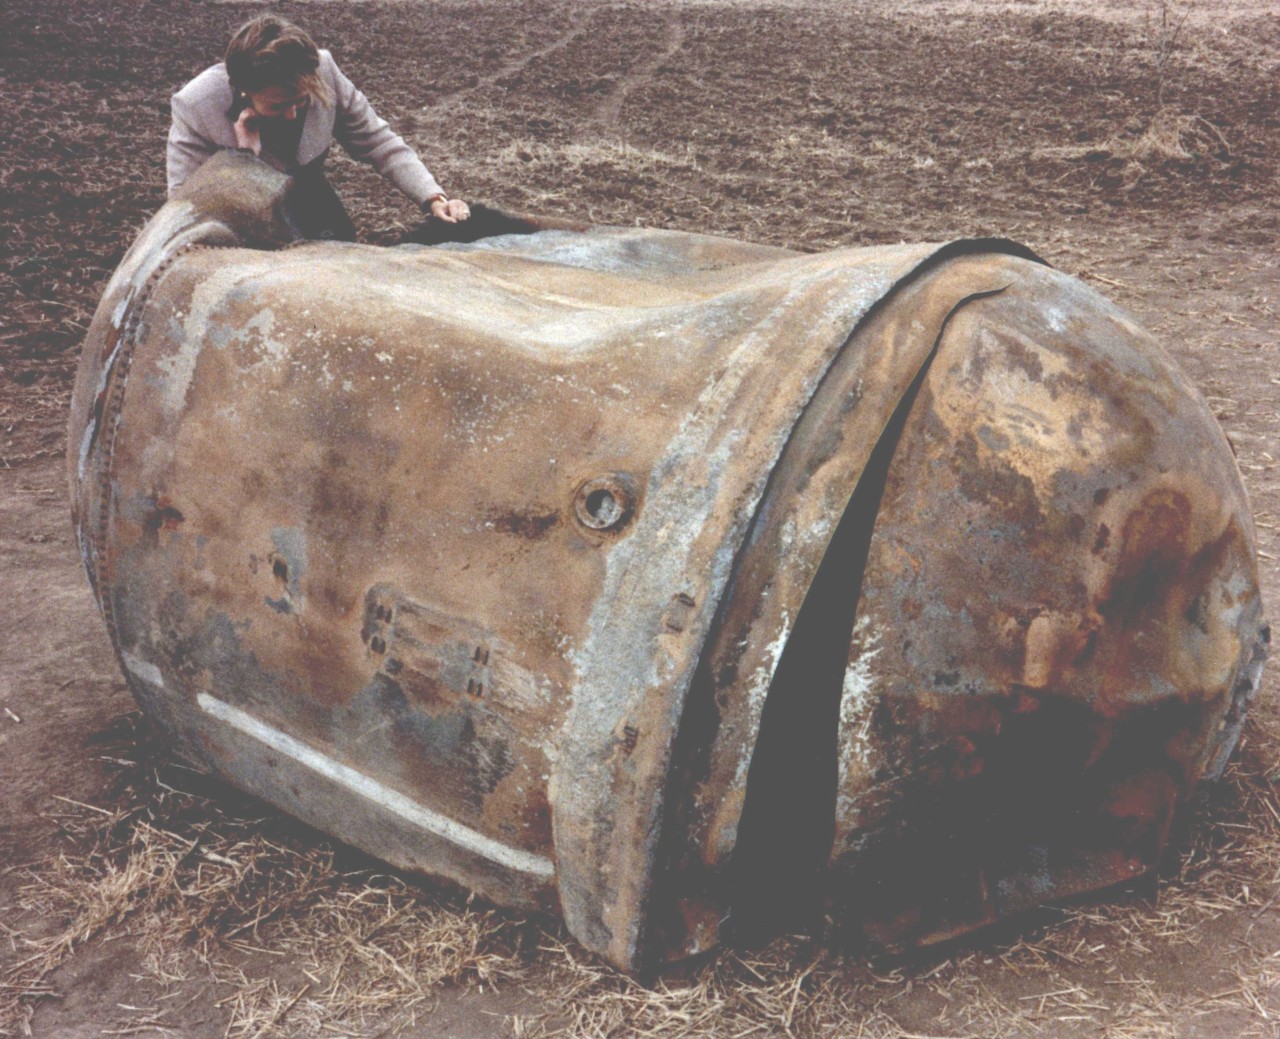 Main propellant tank of the second stage of a Delta 2 launch vehicle which landed near Georgetown, TX (Year - 1997), which weighs about 250 kg tank. Credits: NASA